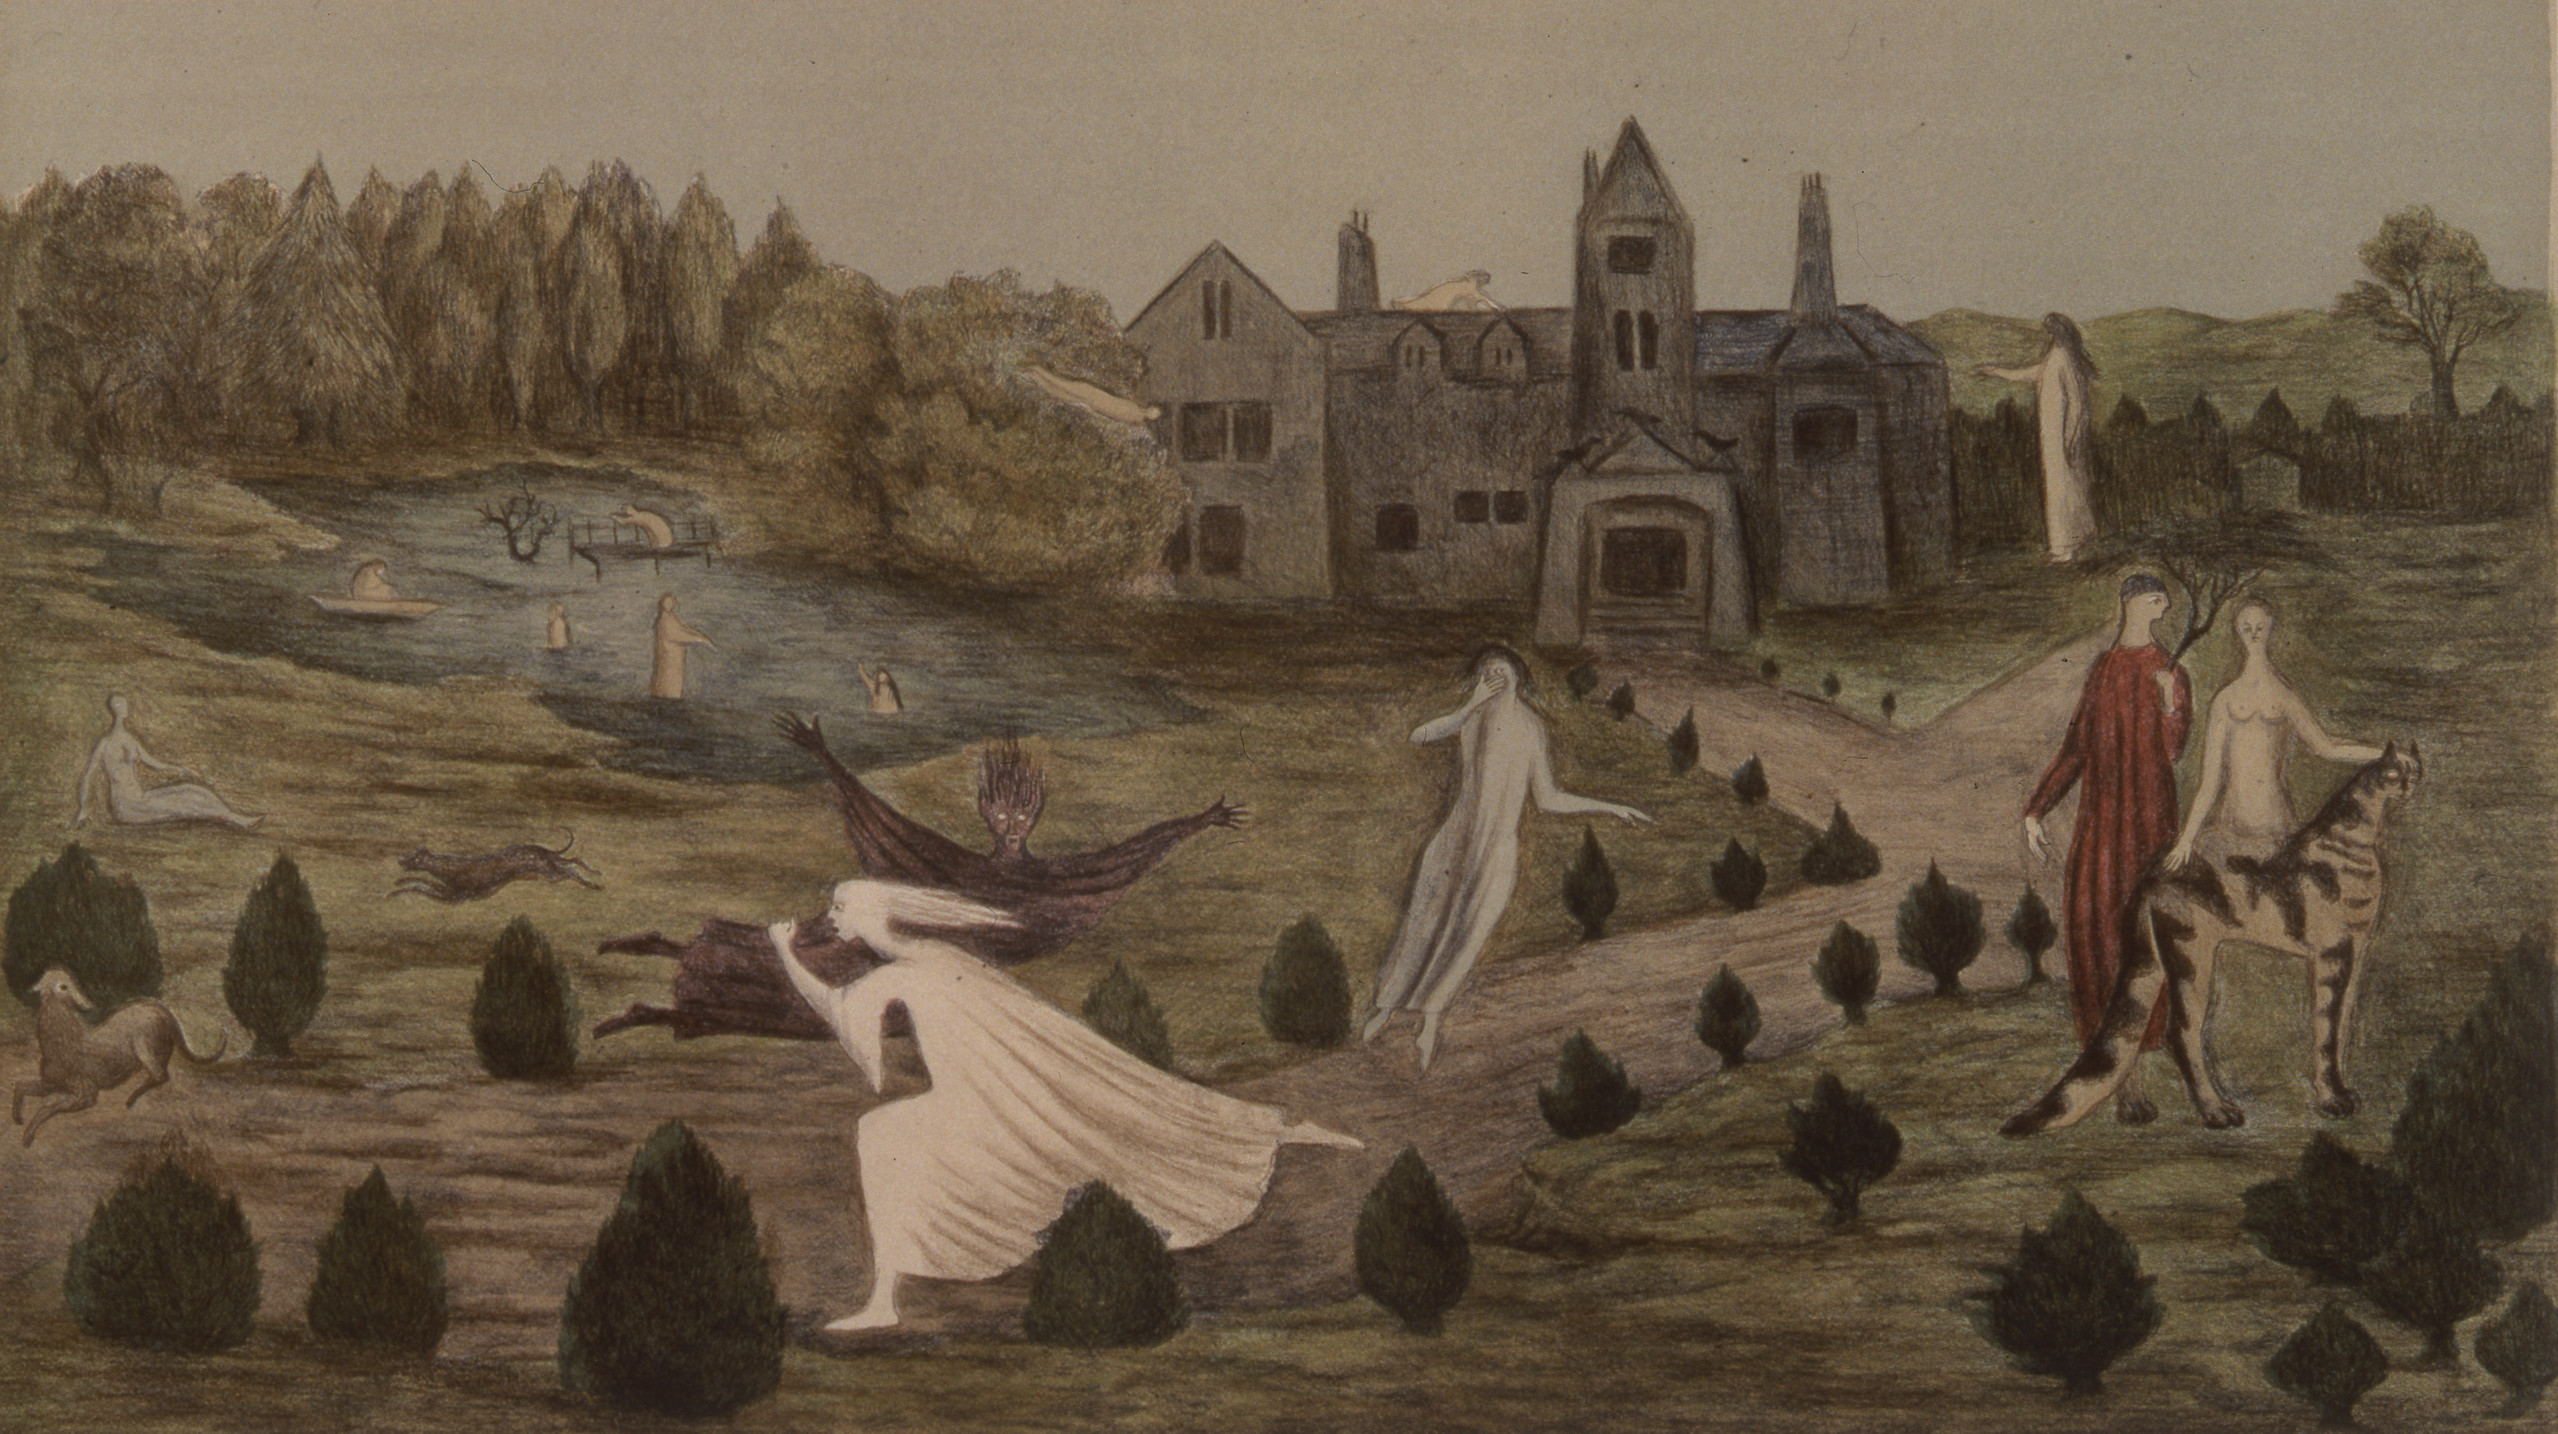 Eerie figures walk, float, swim and stand in a pastoral landscape. A grey house sits next to a small body of water, the lawn decorated with small shrubs and trees. A pair, one dressed and one nude, pet a stripped animal as ghostly figures move through the foreground.